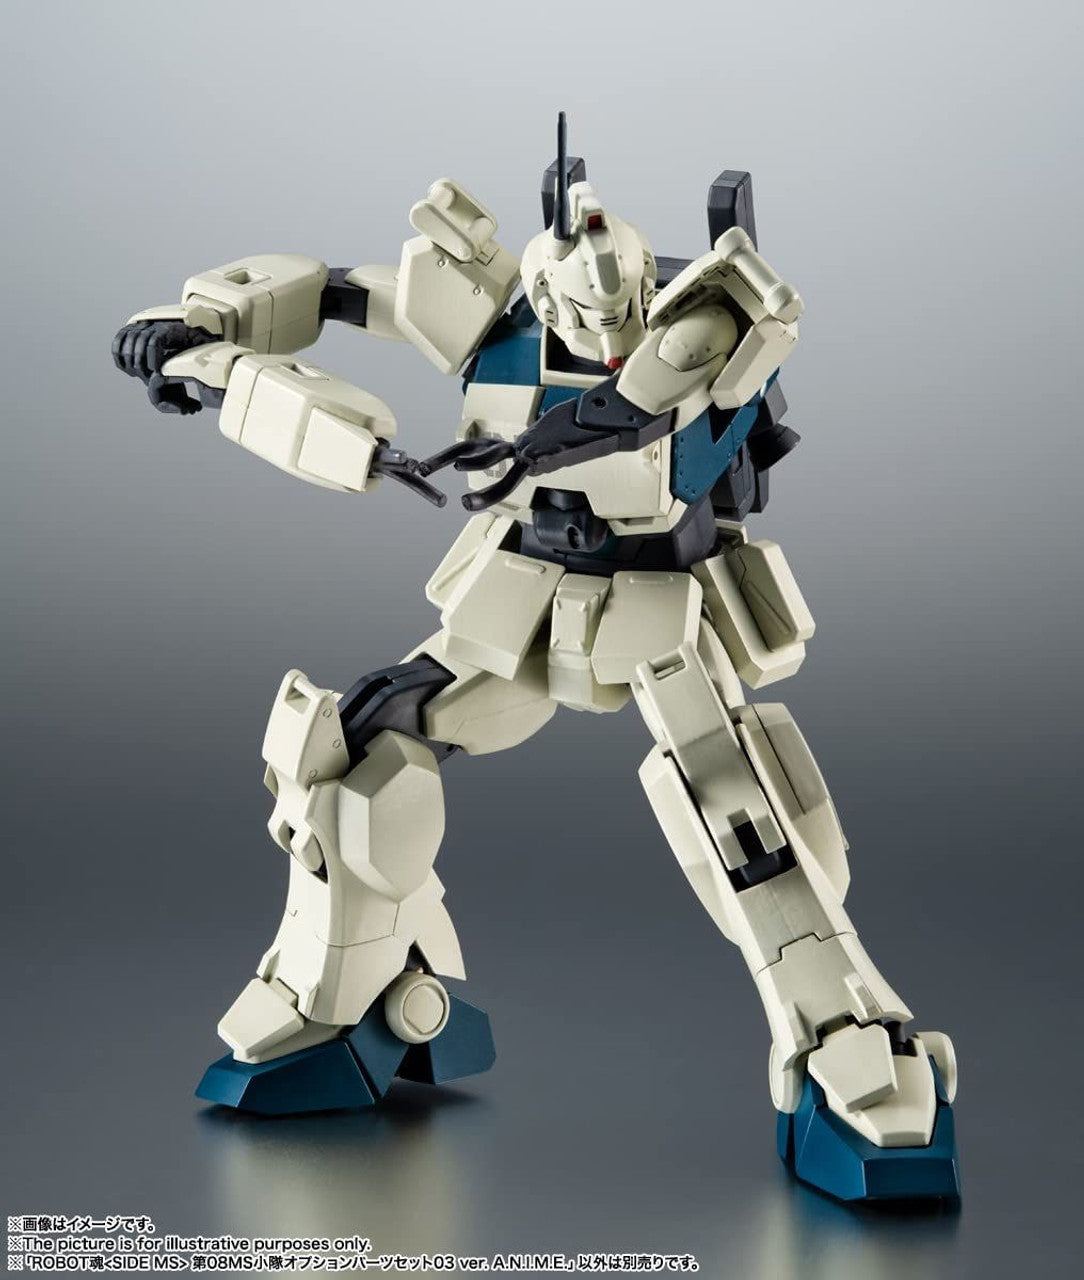 Metal Robot Spirits &lt; Side MS &gt; The 08th MS Team Option Parts Set 03 Ver Anime-Tamashii-Ace Cards &amp; Collectibles